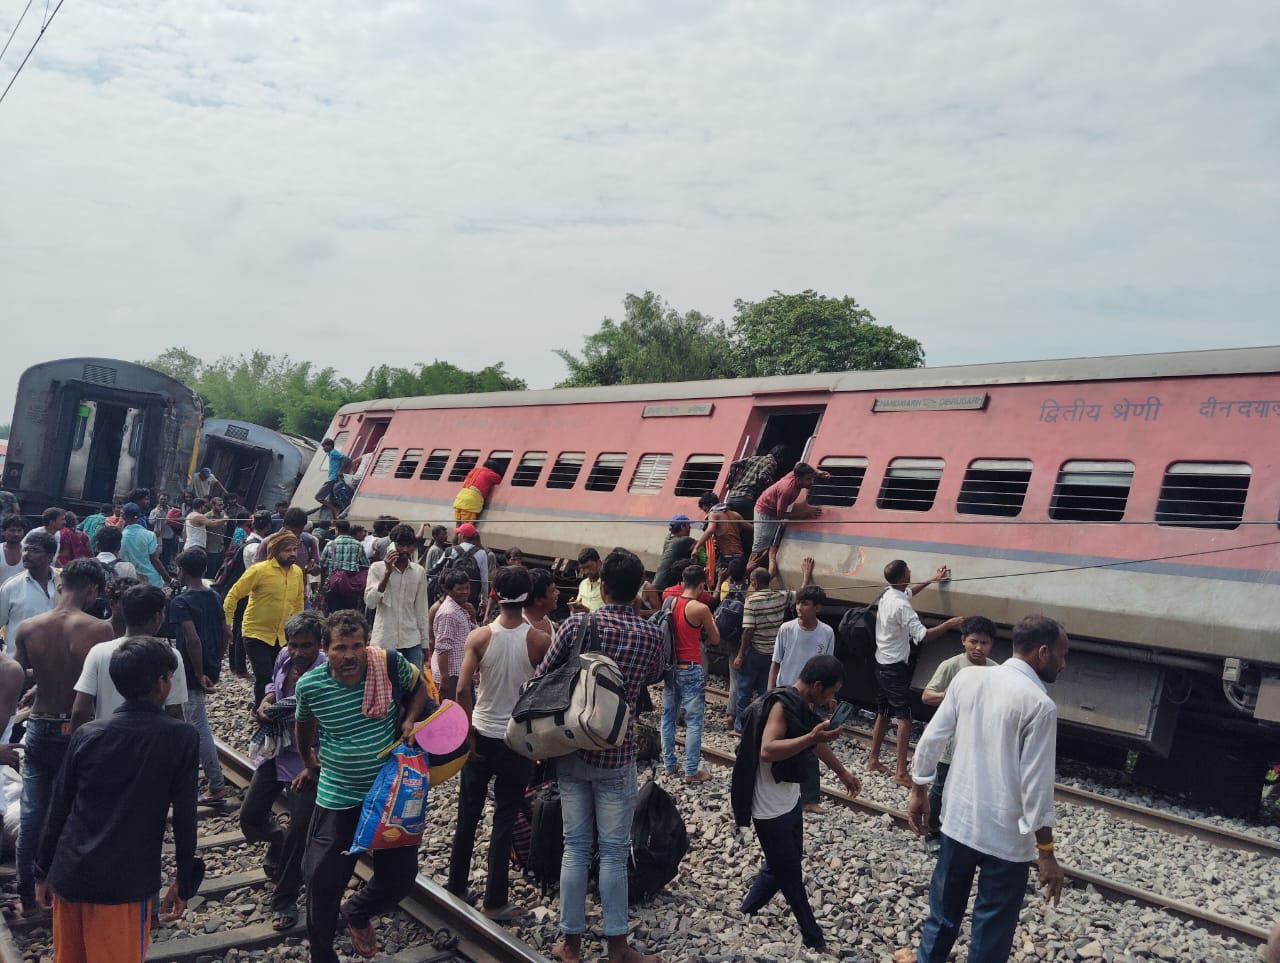 Despite significant improvements, safety remains a concern for Indian Railways